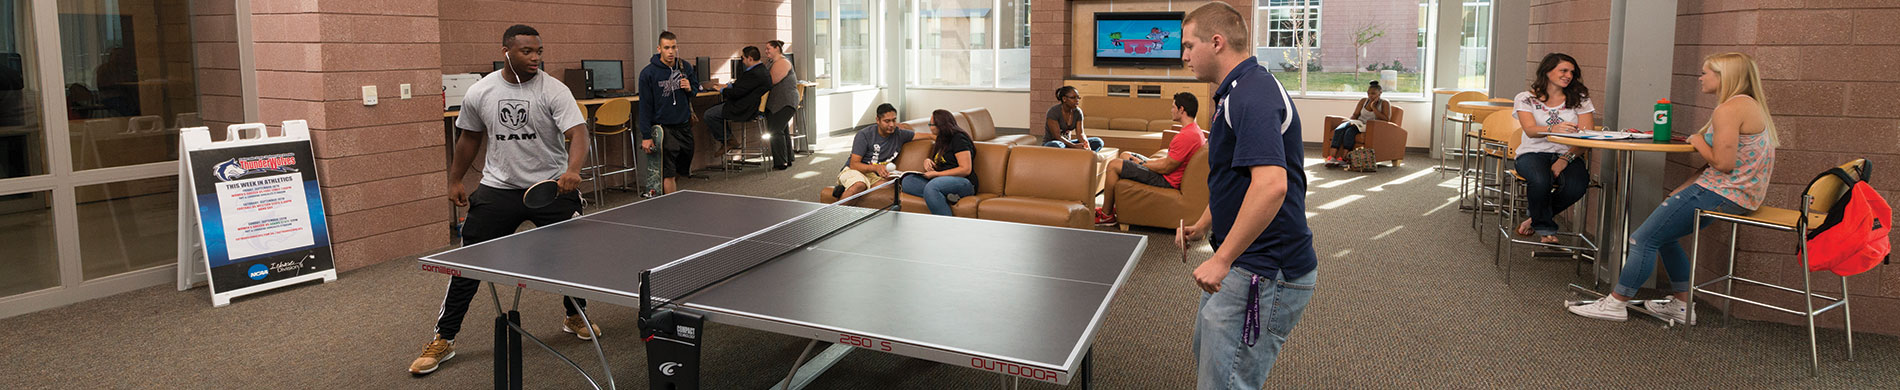 Residents playing ping pong in Culebra Lobby